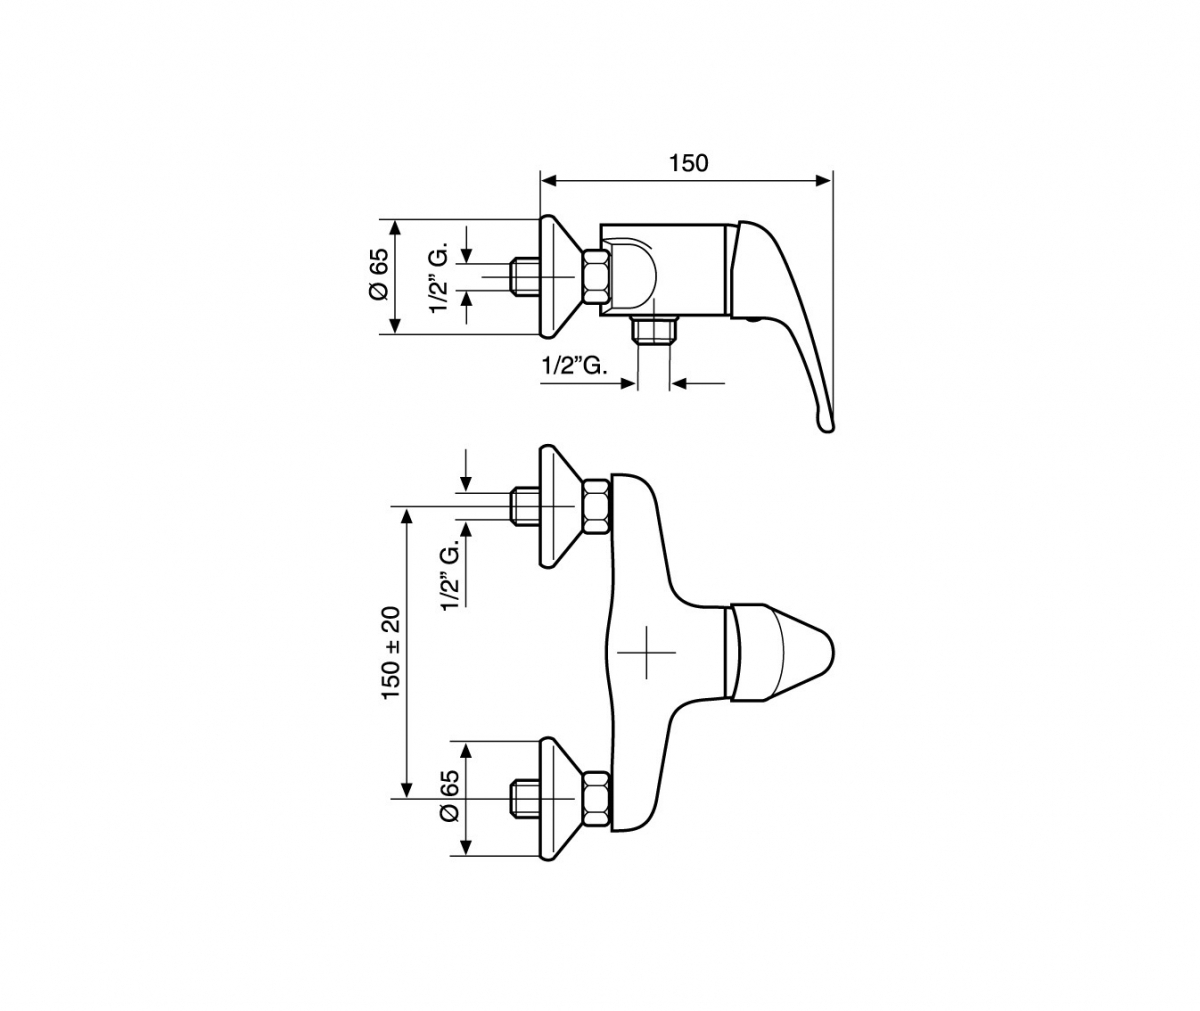 AMBRA SHOWER MIXER TECHNICAL DRAWING